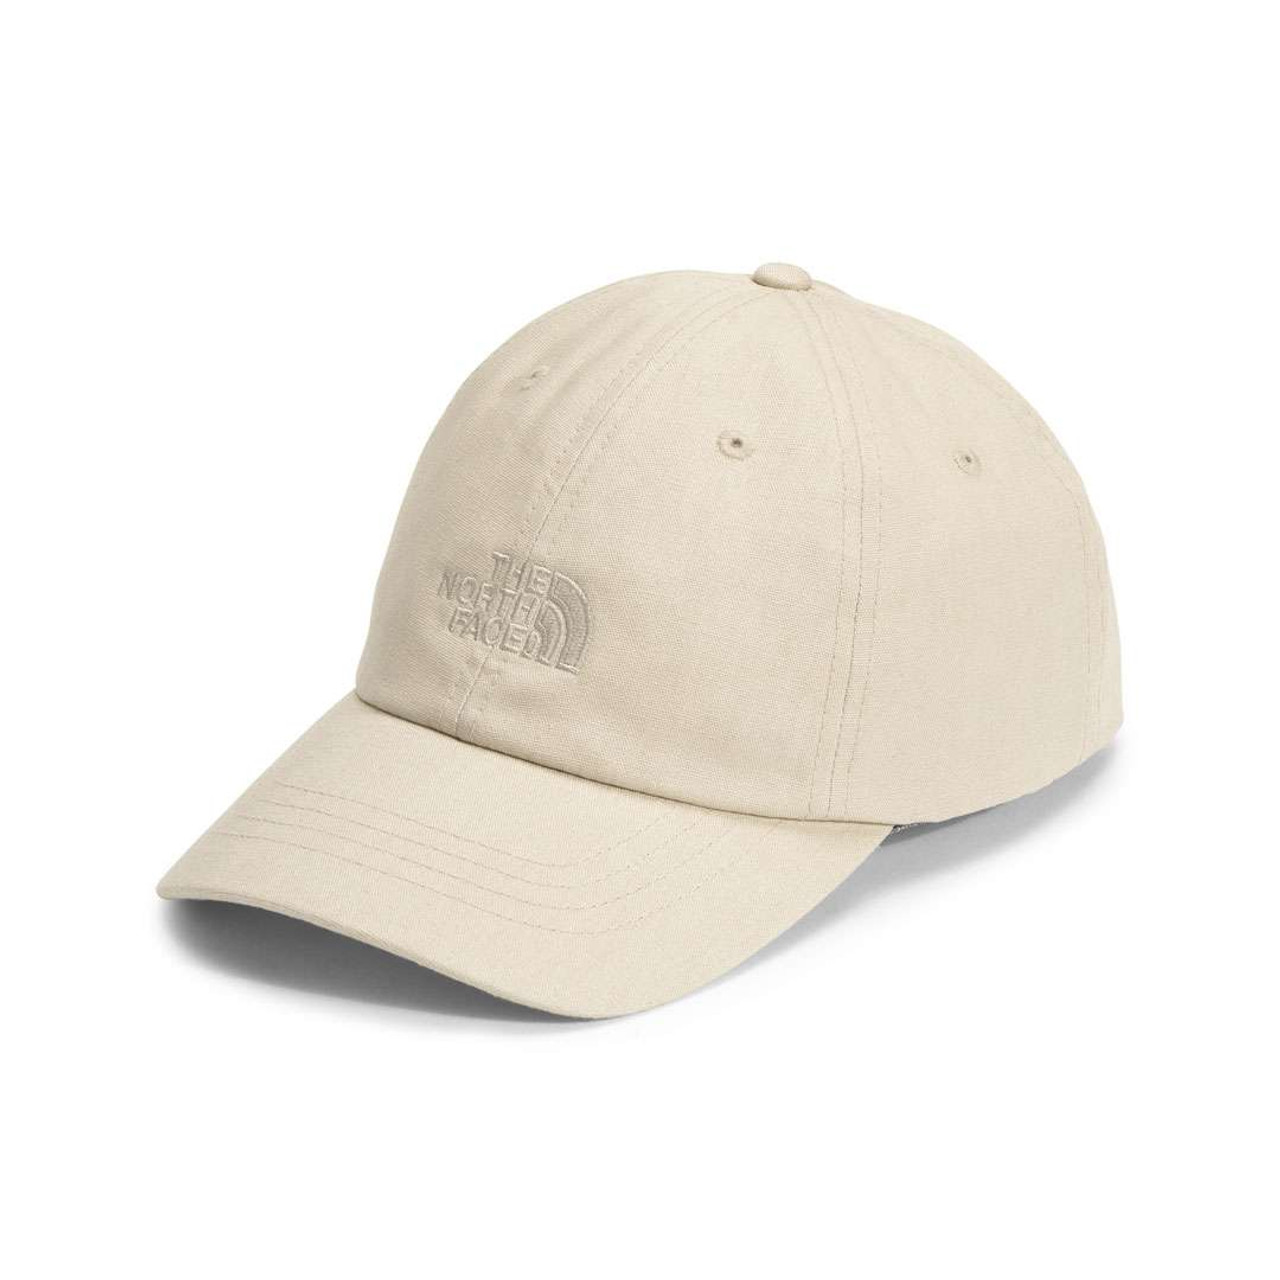 The North Face Casquette Norm Hat NF0A3SH3LV41 Orange